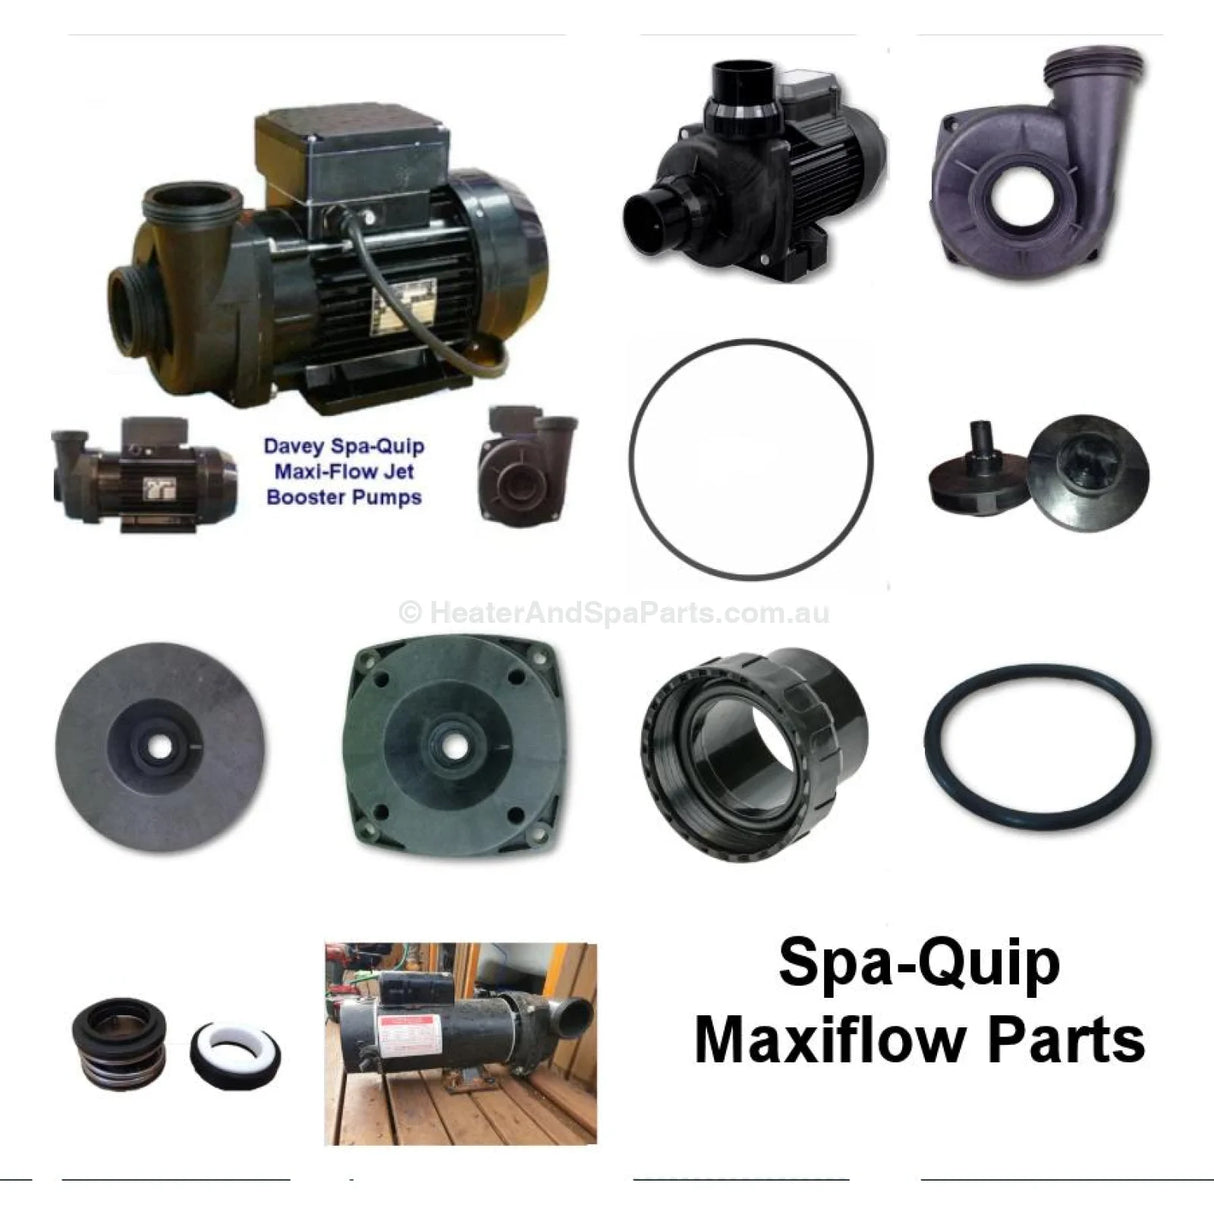 Davey SpaQuip Maxiflow Spa Booster Jet Pump - Spare Parts Listing - Heater and Spa Parts